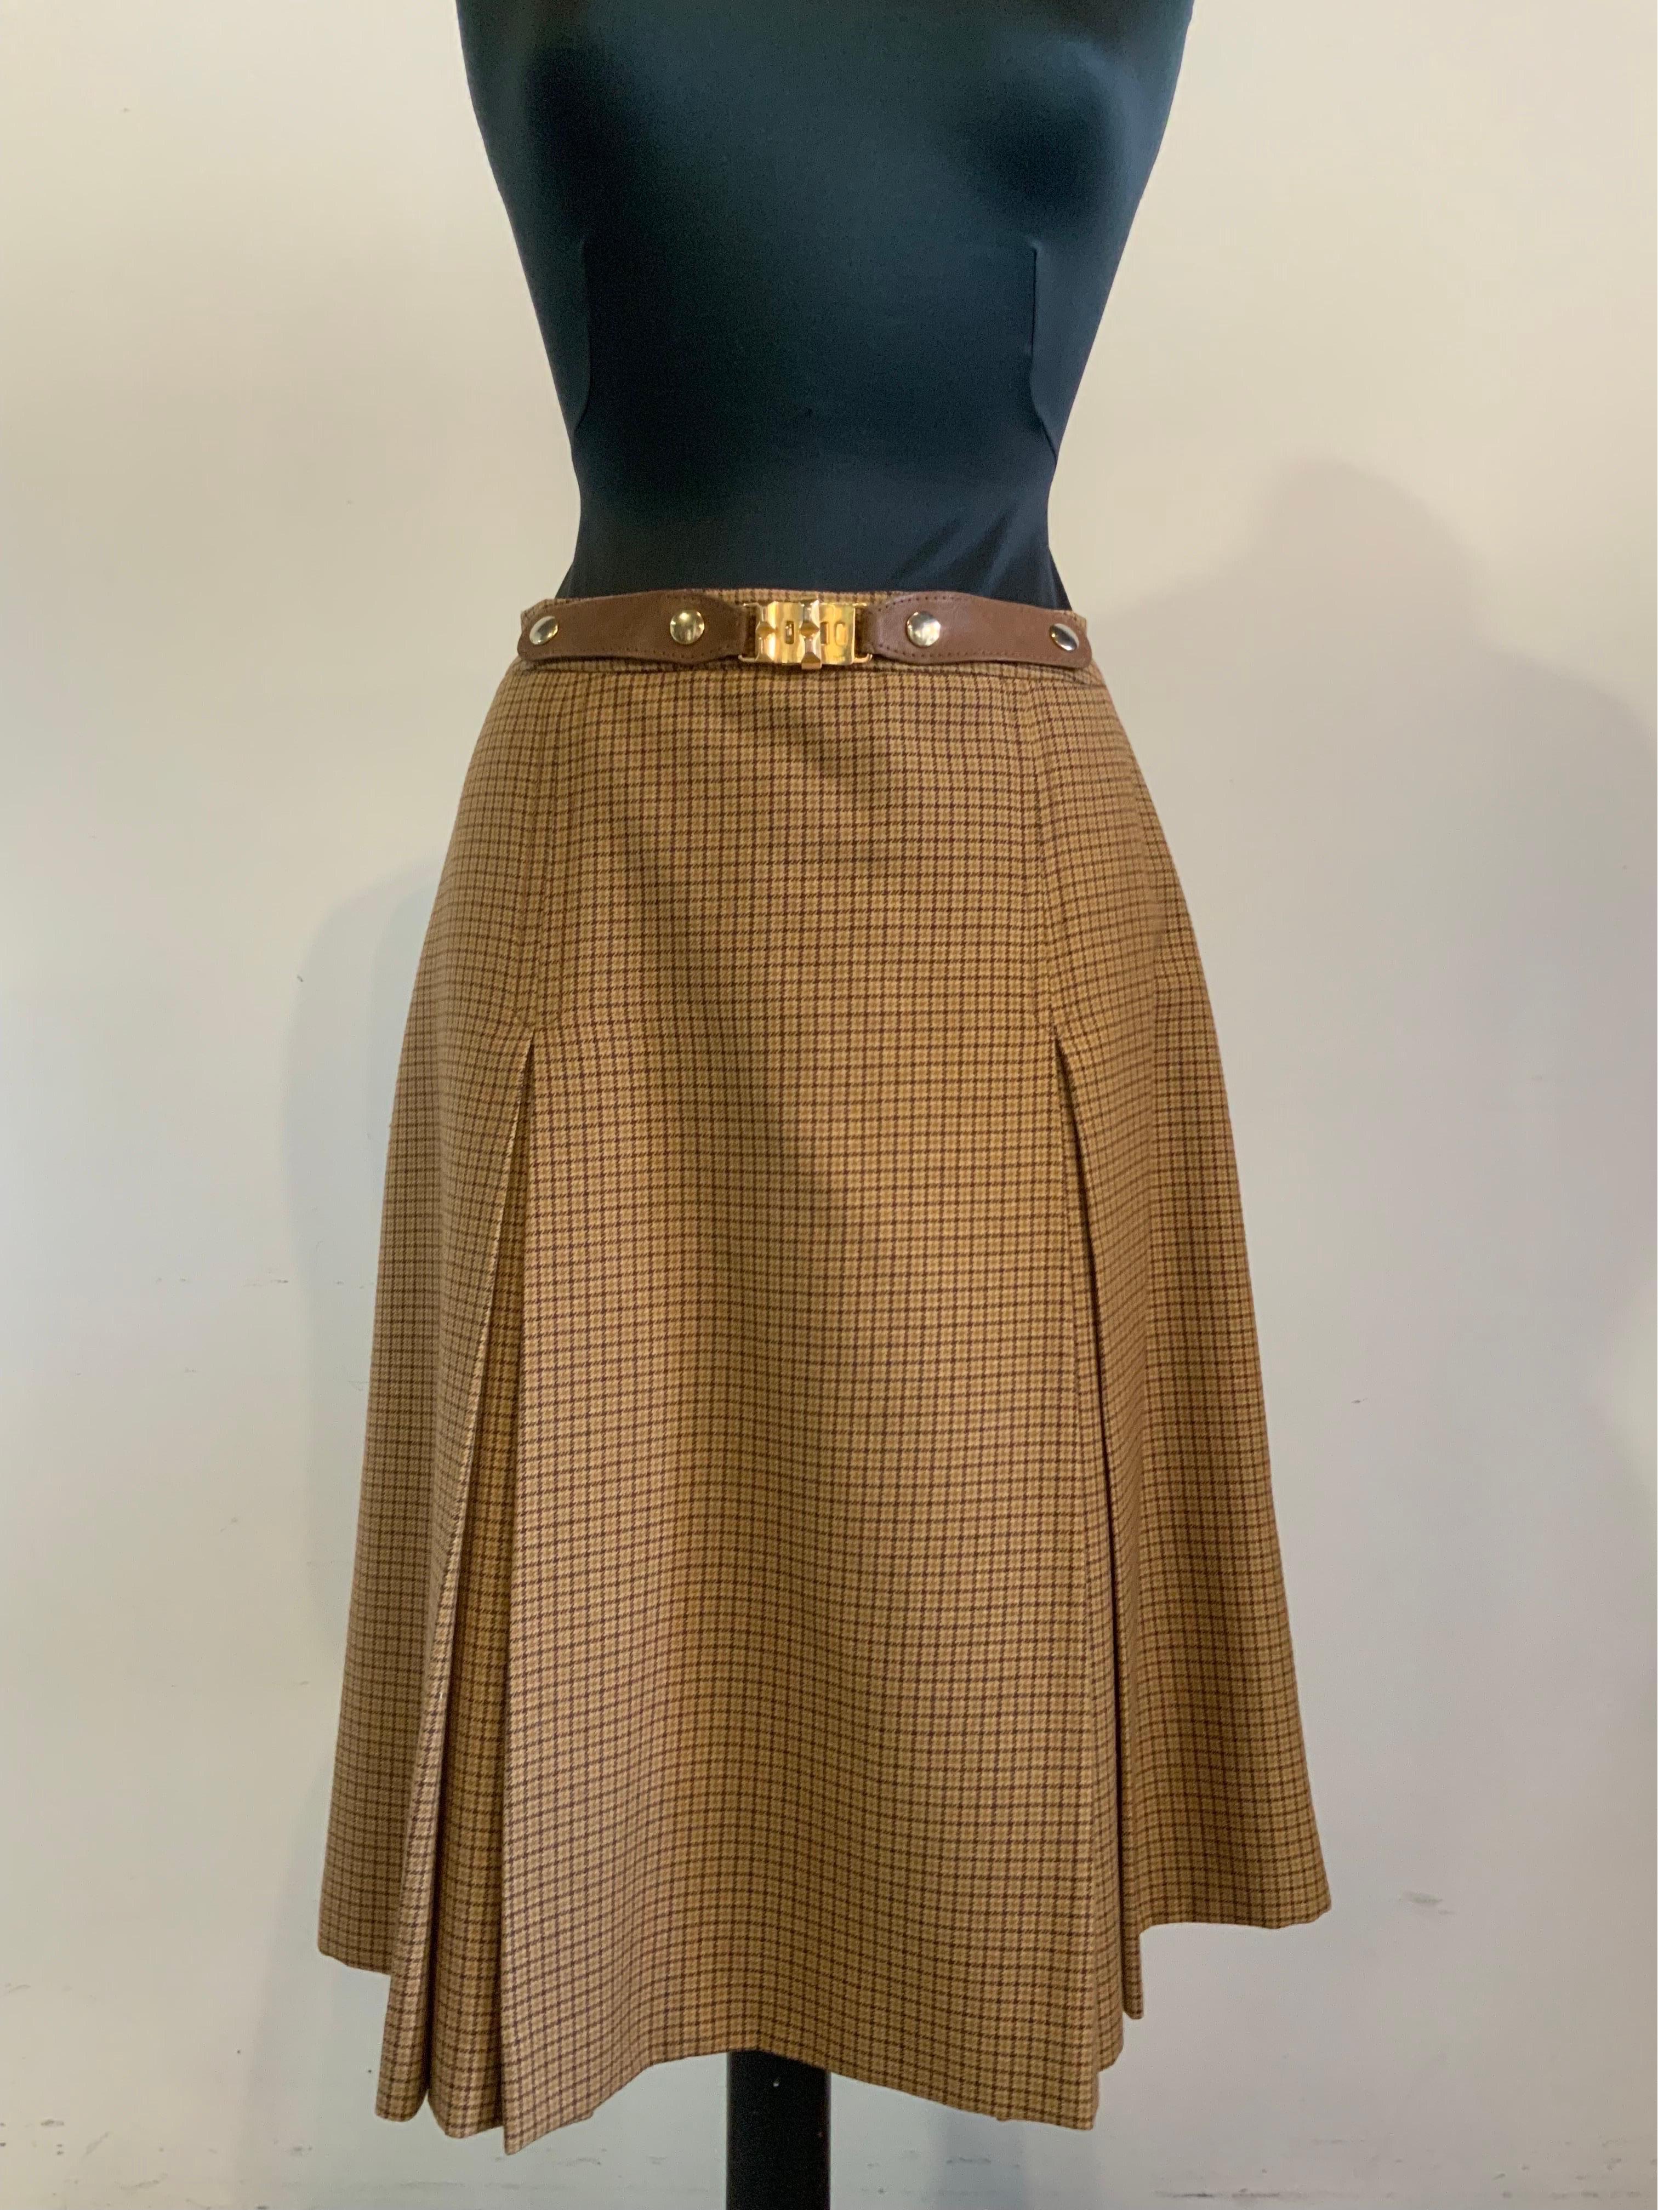 CELINE CHECKED SKIRT
Composition and size label missing.
We think it's wool with leather details. Lined interior.
The buttons and belt closure are slightly oxidized.
He wears an Italian 46/48.
Waist 43 cm
Length 62 cm
Good general condition, shows